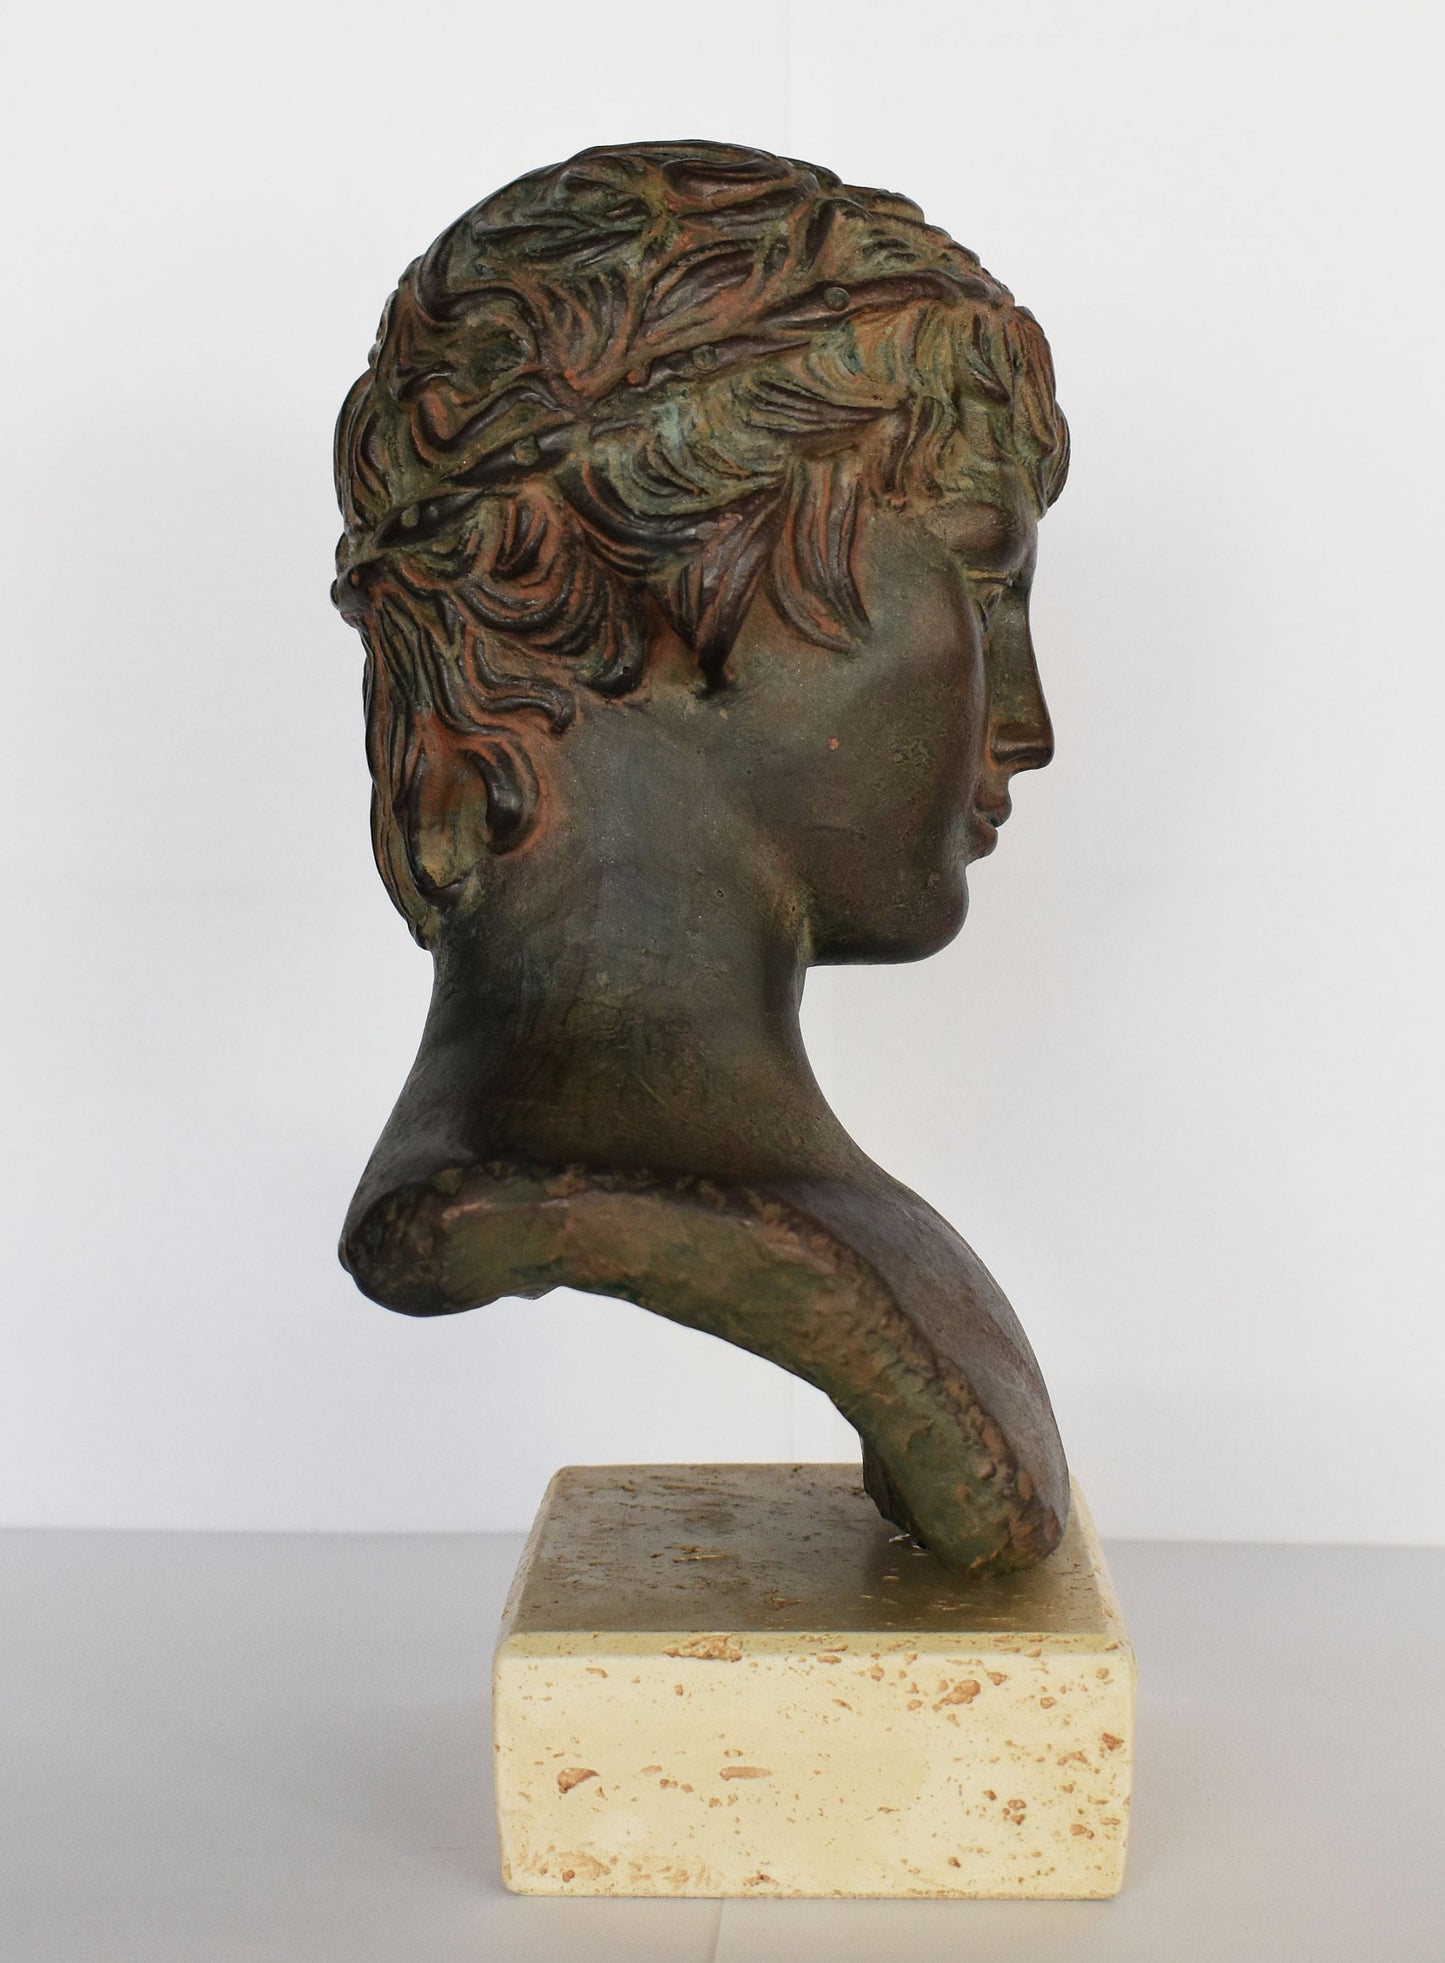 Antinous - Antinoos - An Ancient Love Story with Roman Emperor Hadrian over the Centuries - Reproduction - Head Bust - Bronze Colour Effect